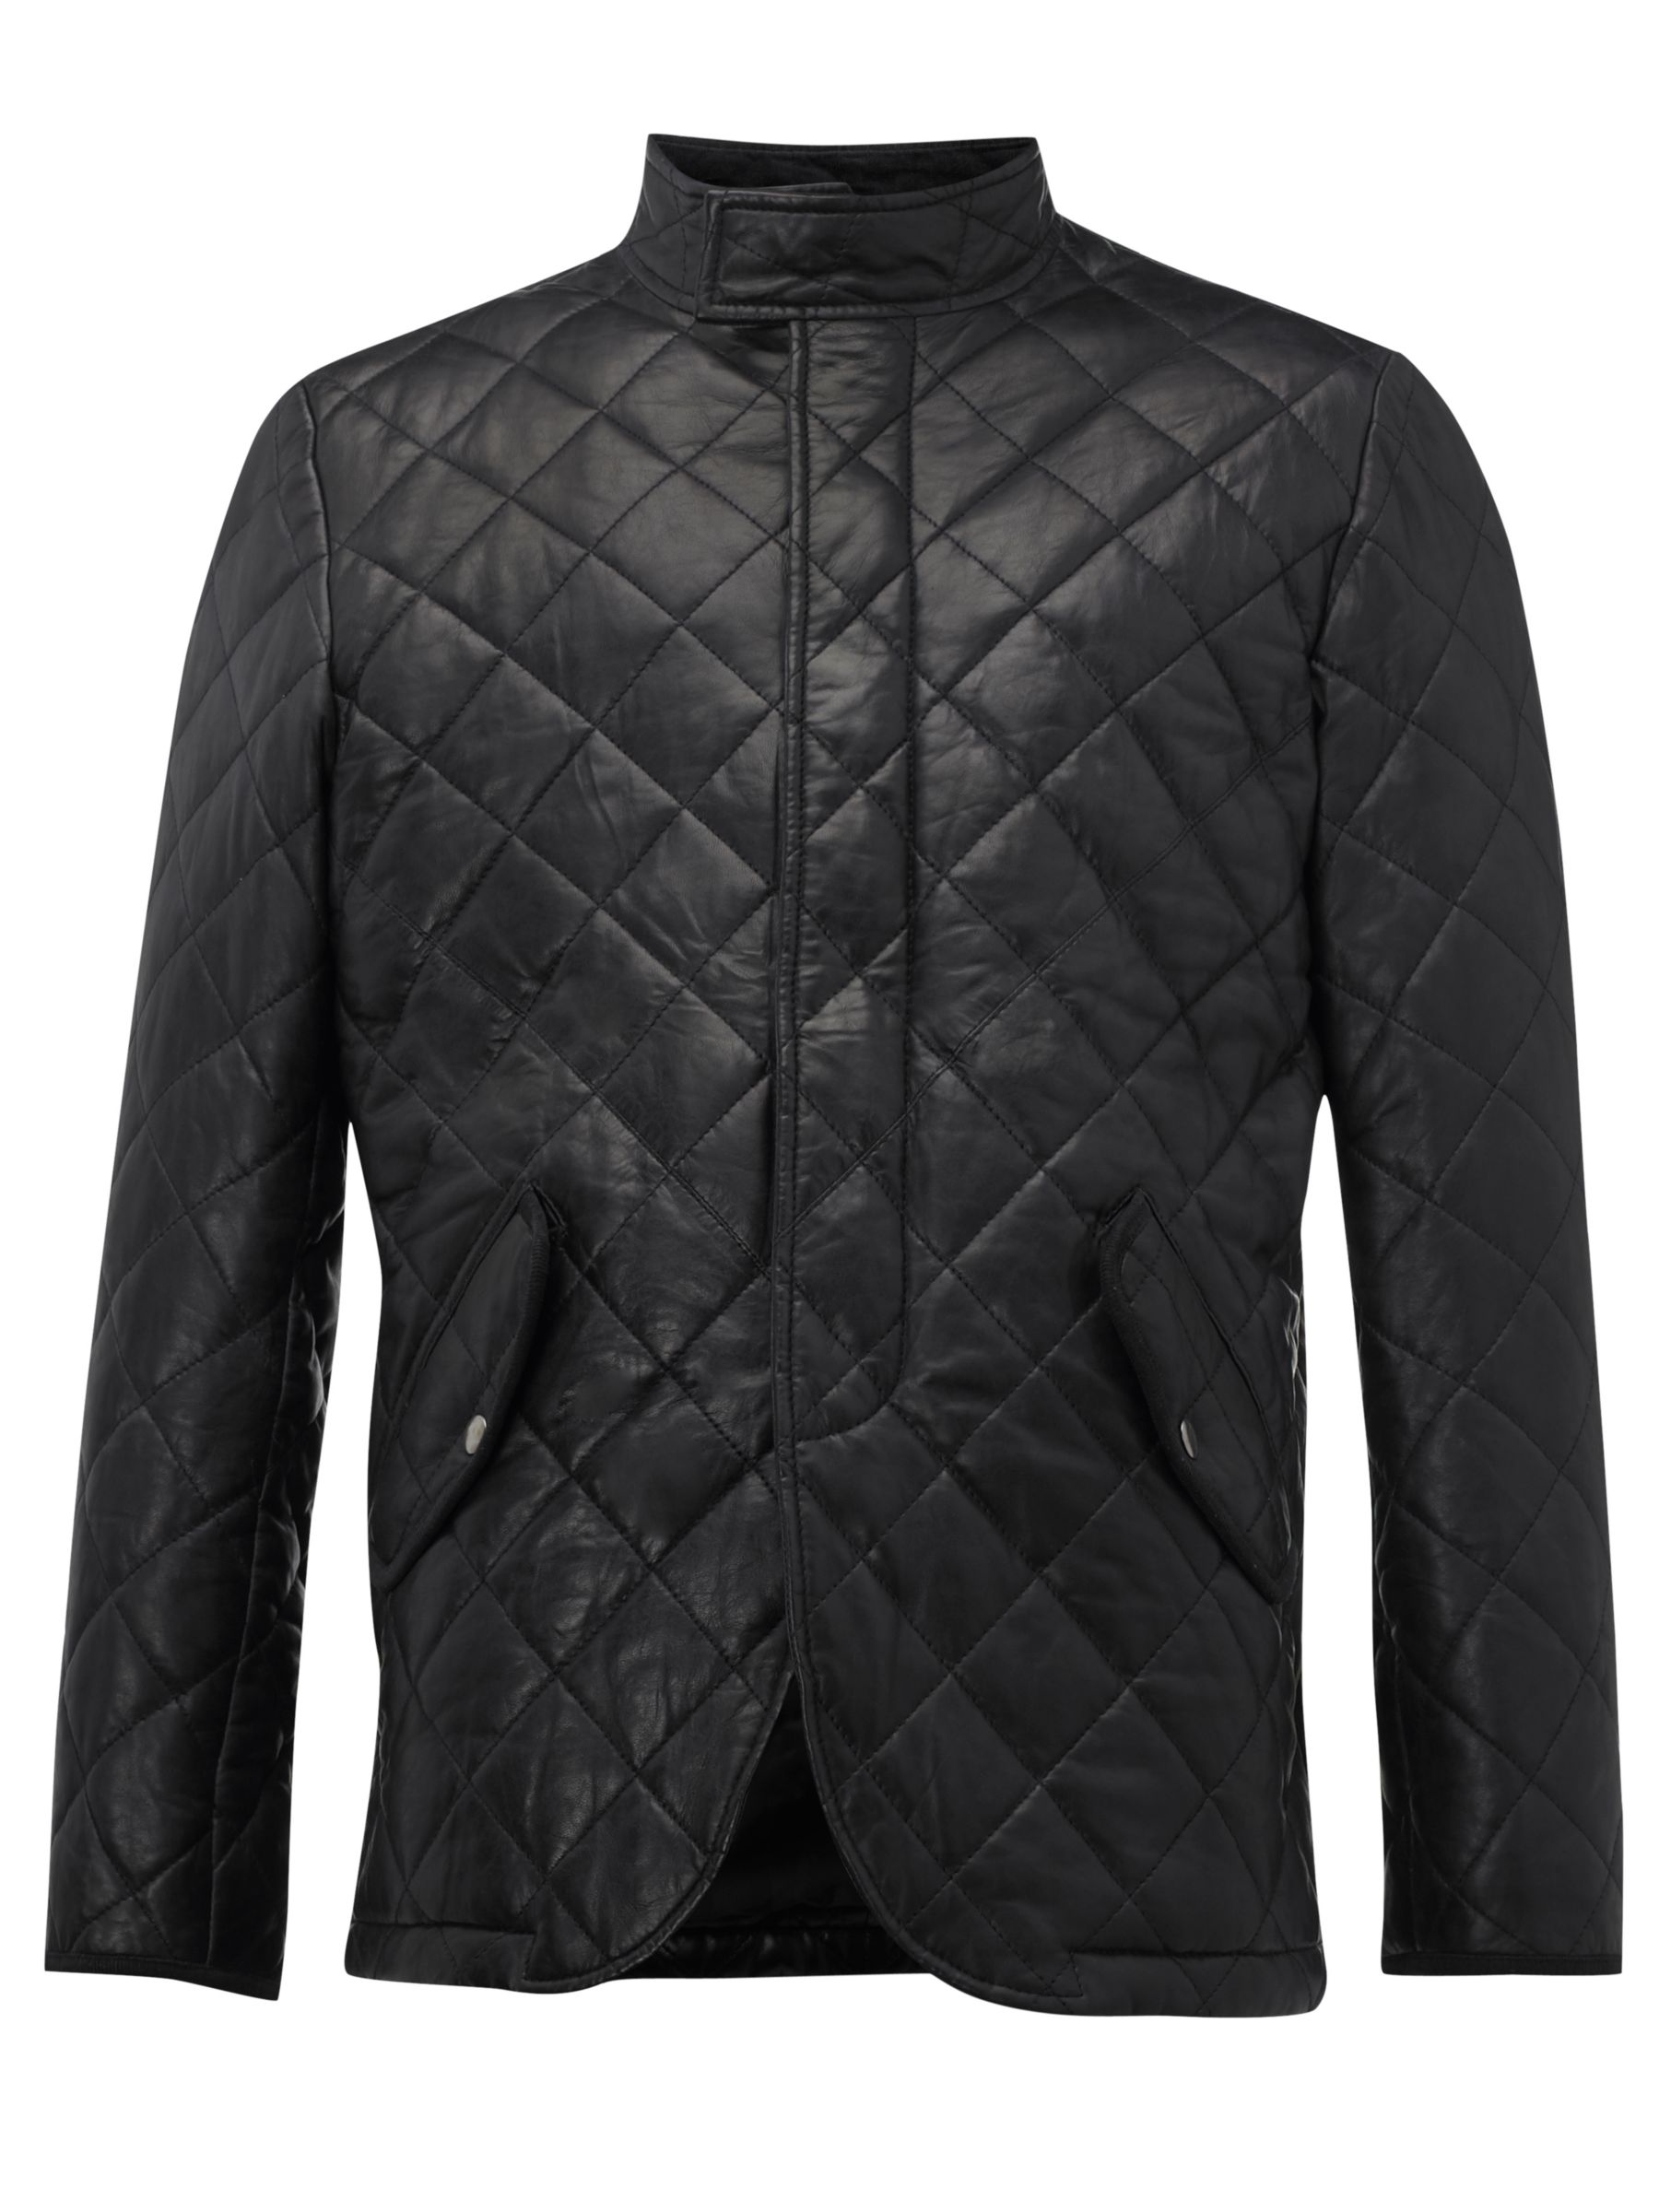 Joe Casely-Hayford for John Lewis Alcade Quilted Leather Jacket, Navy at John Lewis